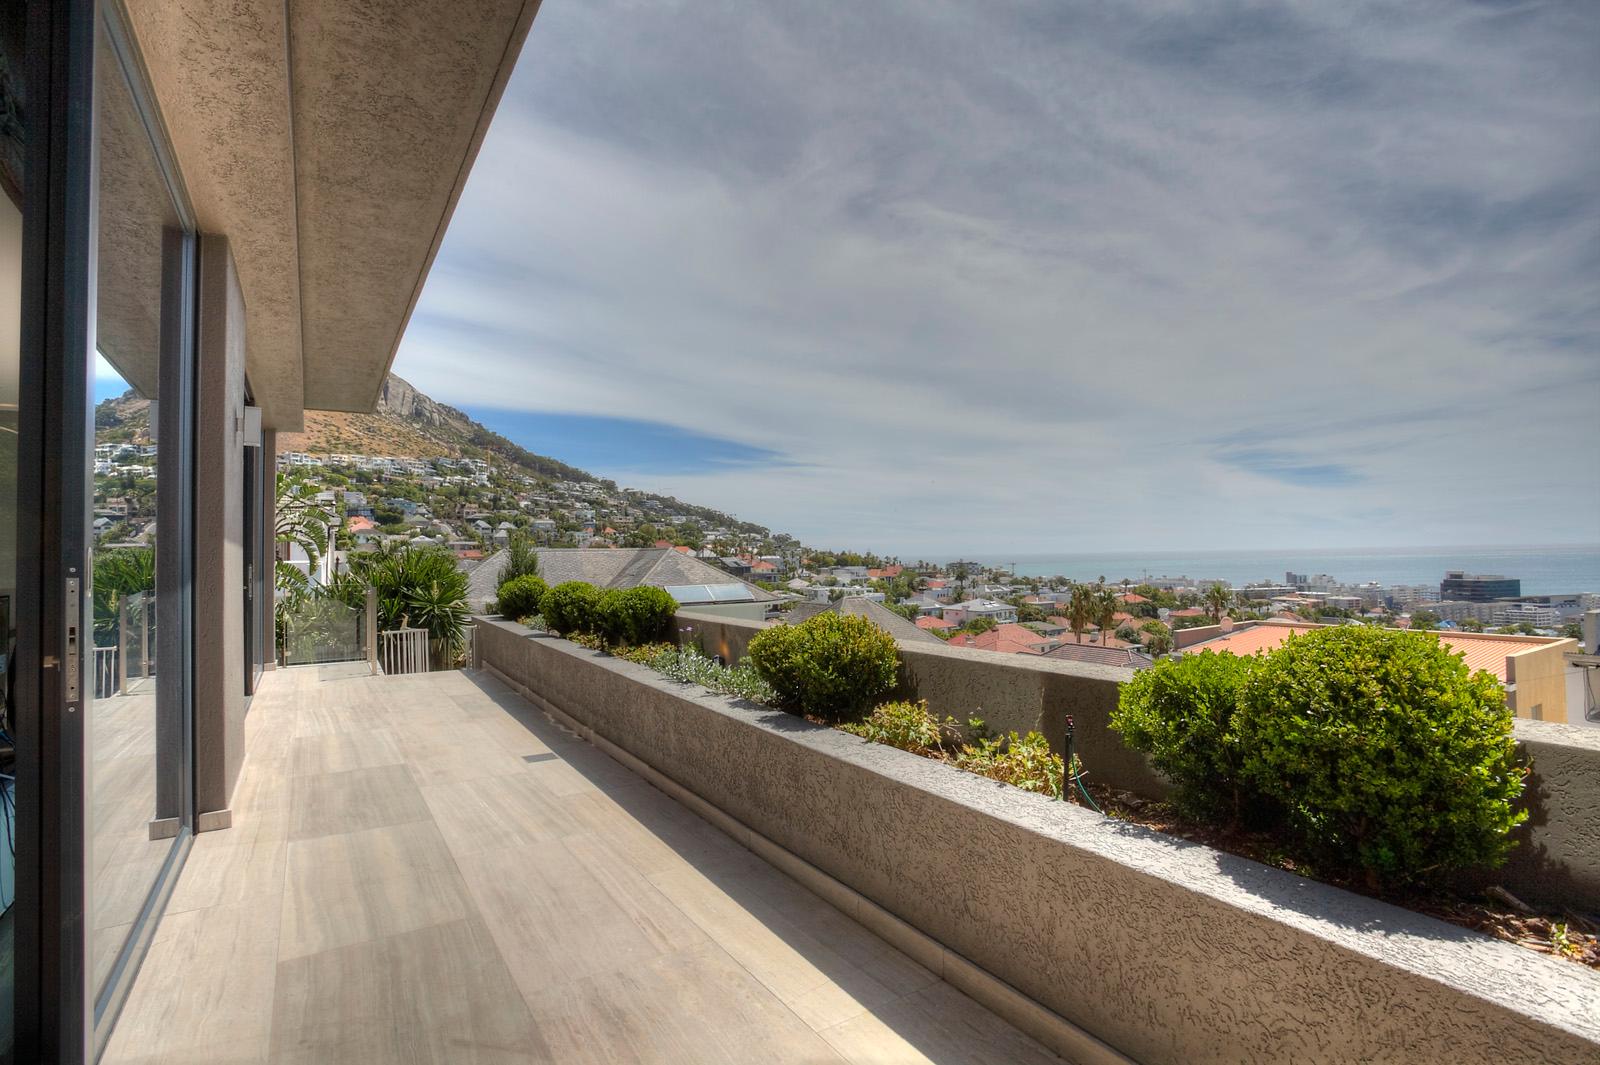 Photo 12 of Bordeaux Villa accommodation in Fresnaye, Cape Town with 4 bedrooms and 3.5 bathrooms